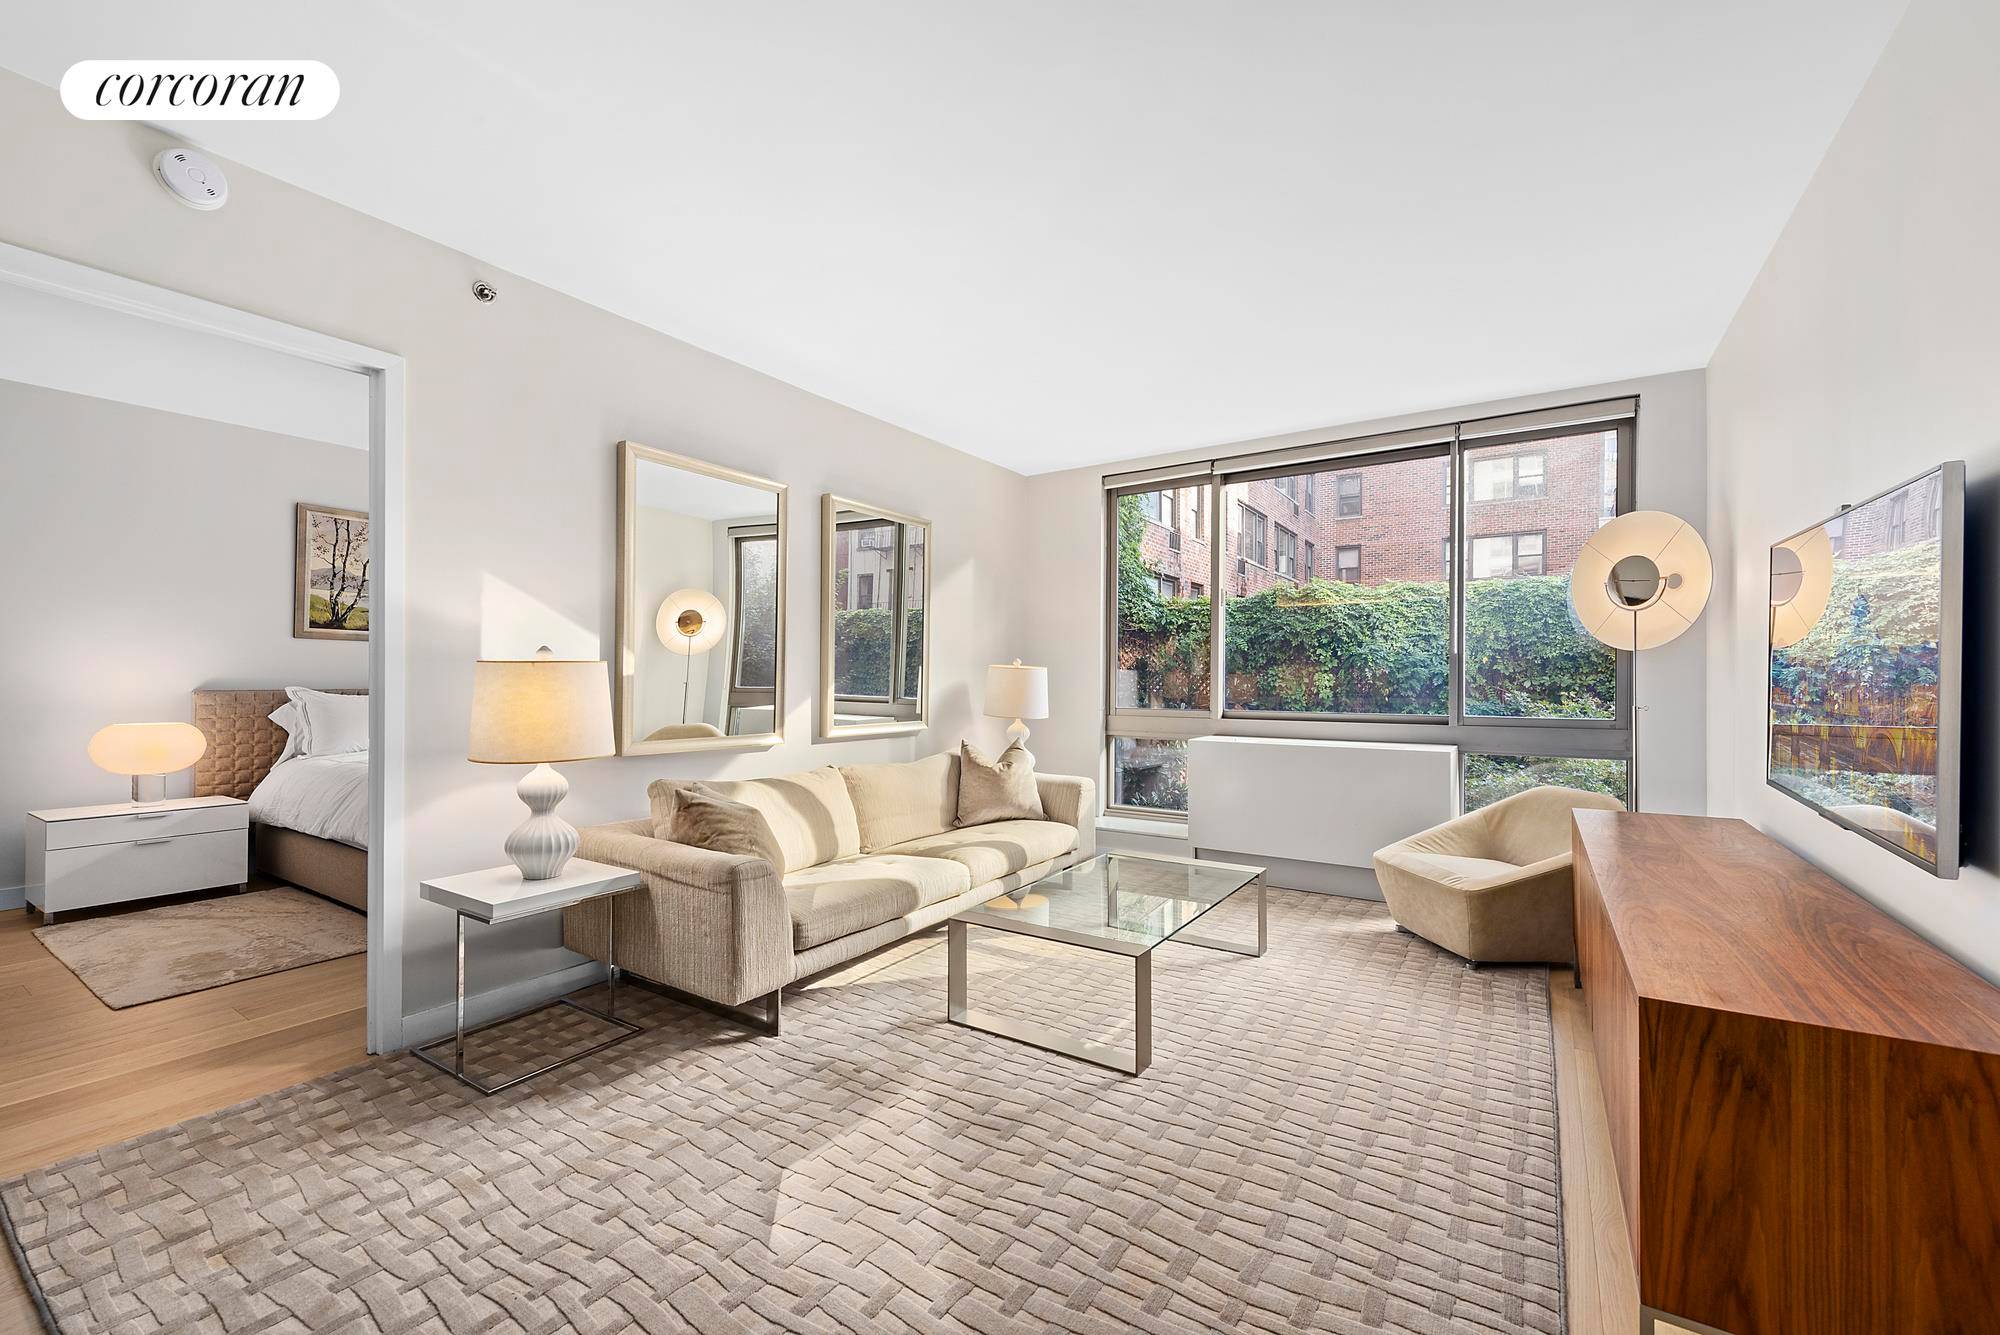 Meticulously designed for elegant living and entertaining, this sunny two bedroom, two bathroom home boasts gorgeous garden views and chic interiors in an amenity rich Kips Bay condop.